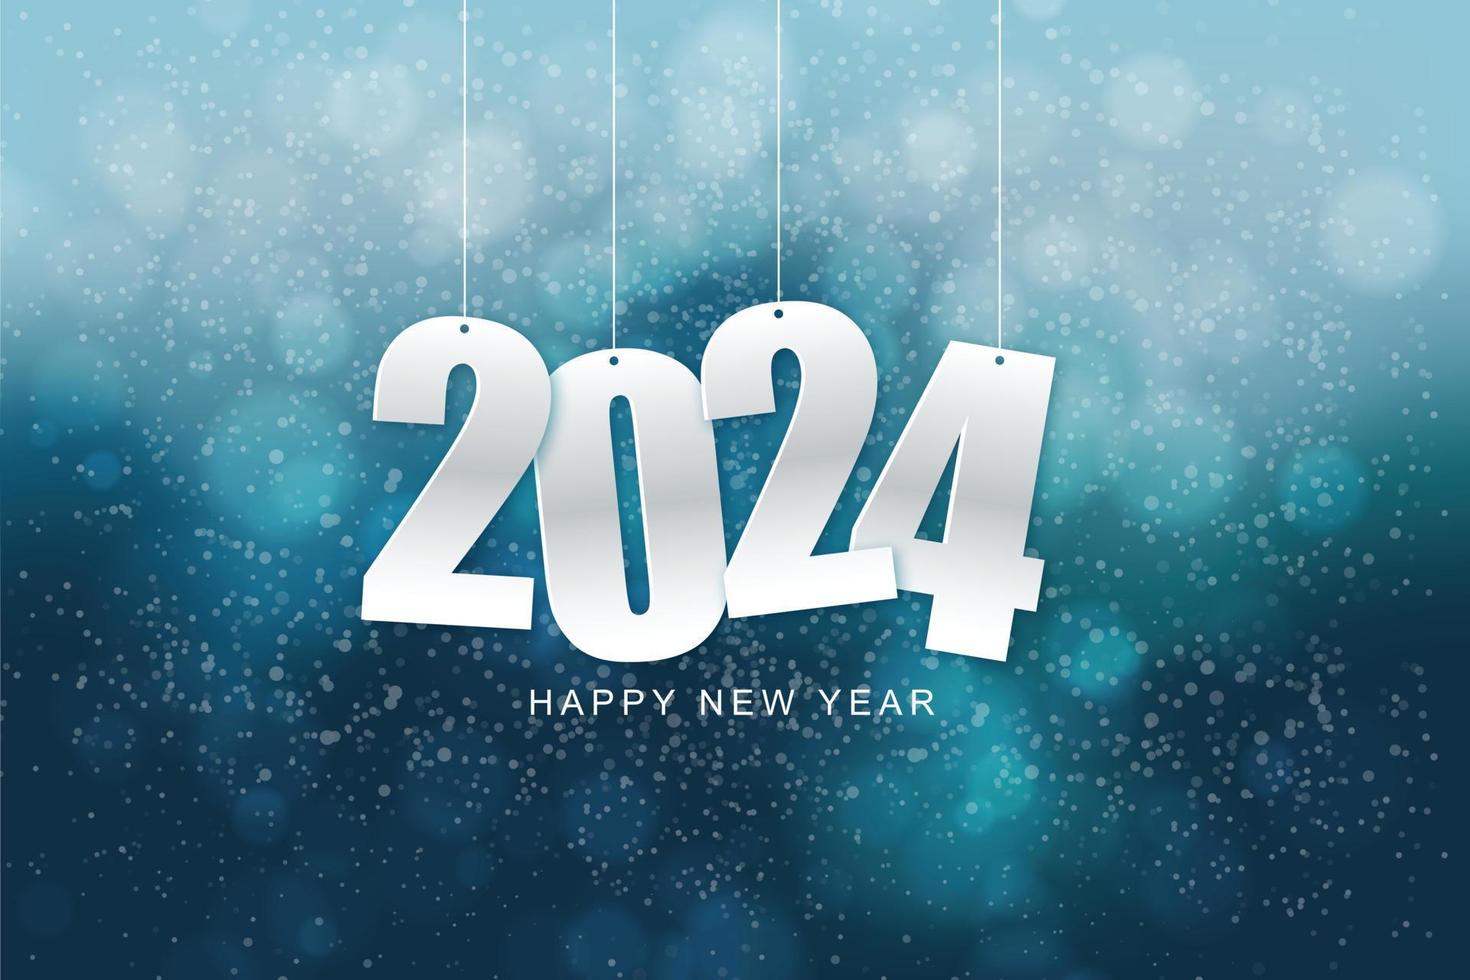 Happy new year 2024. Hanging white paper number with confetti on a